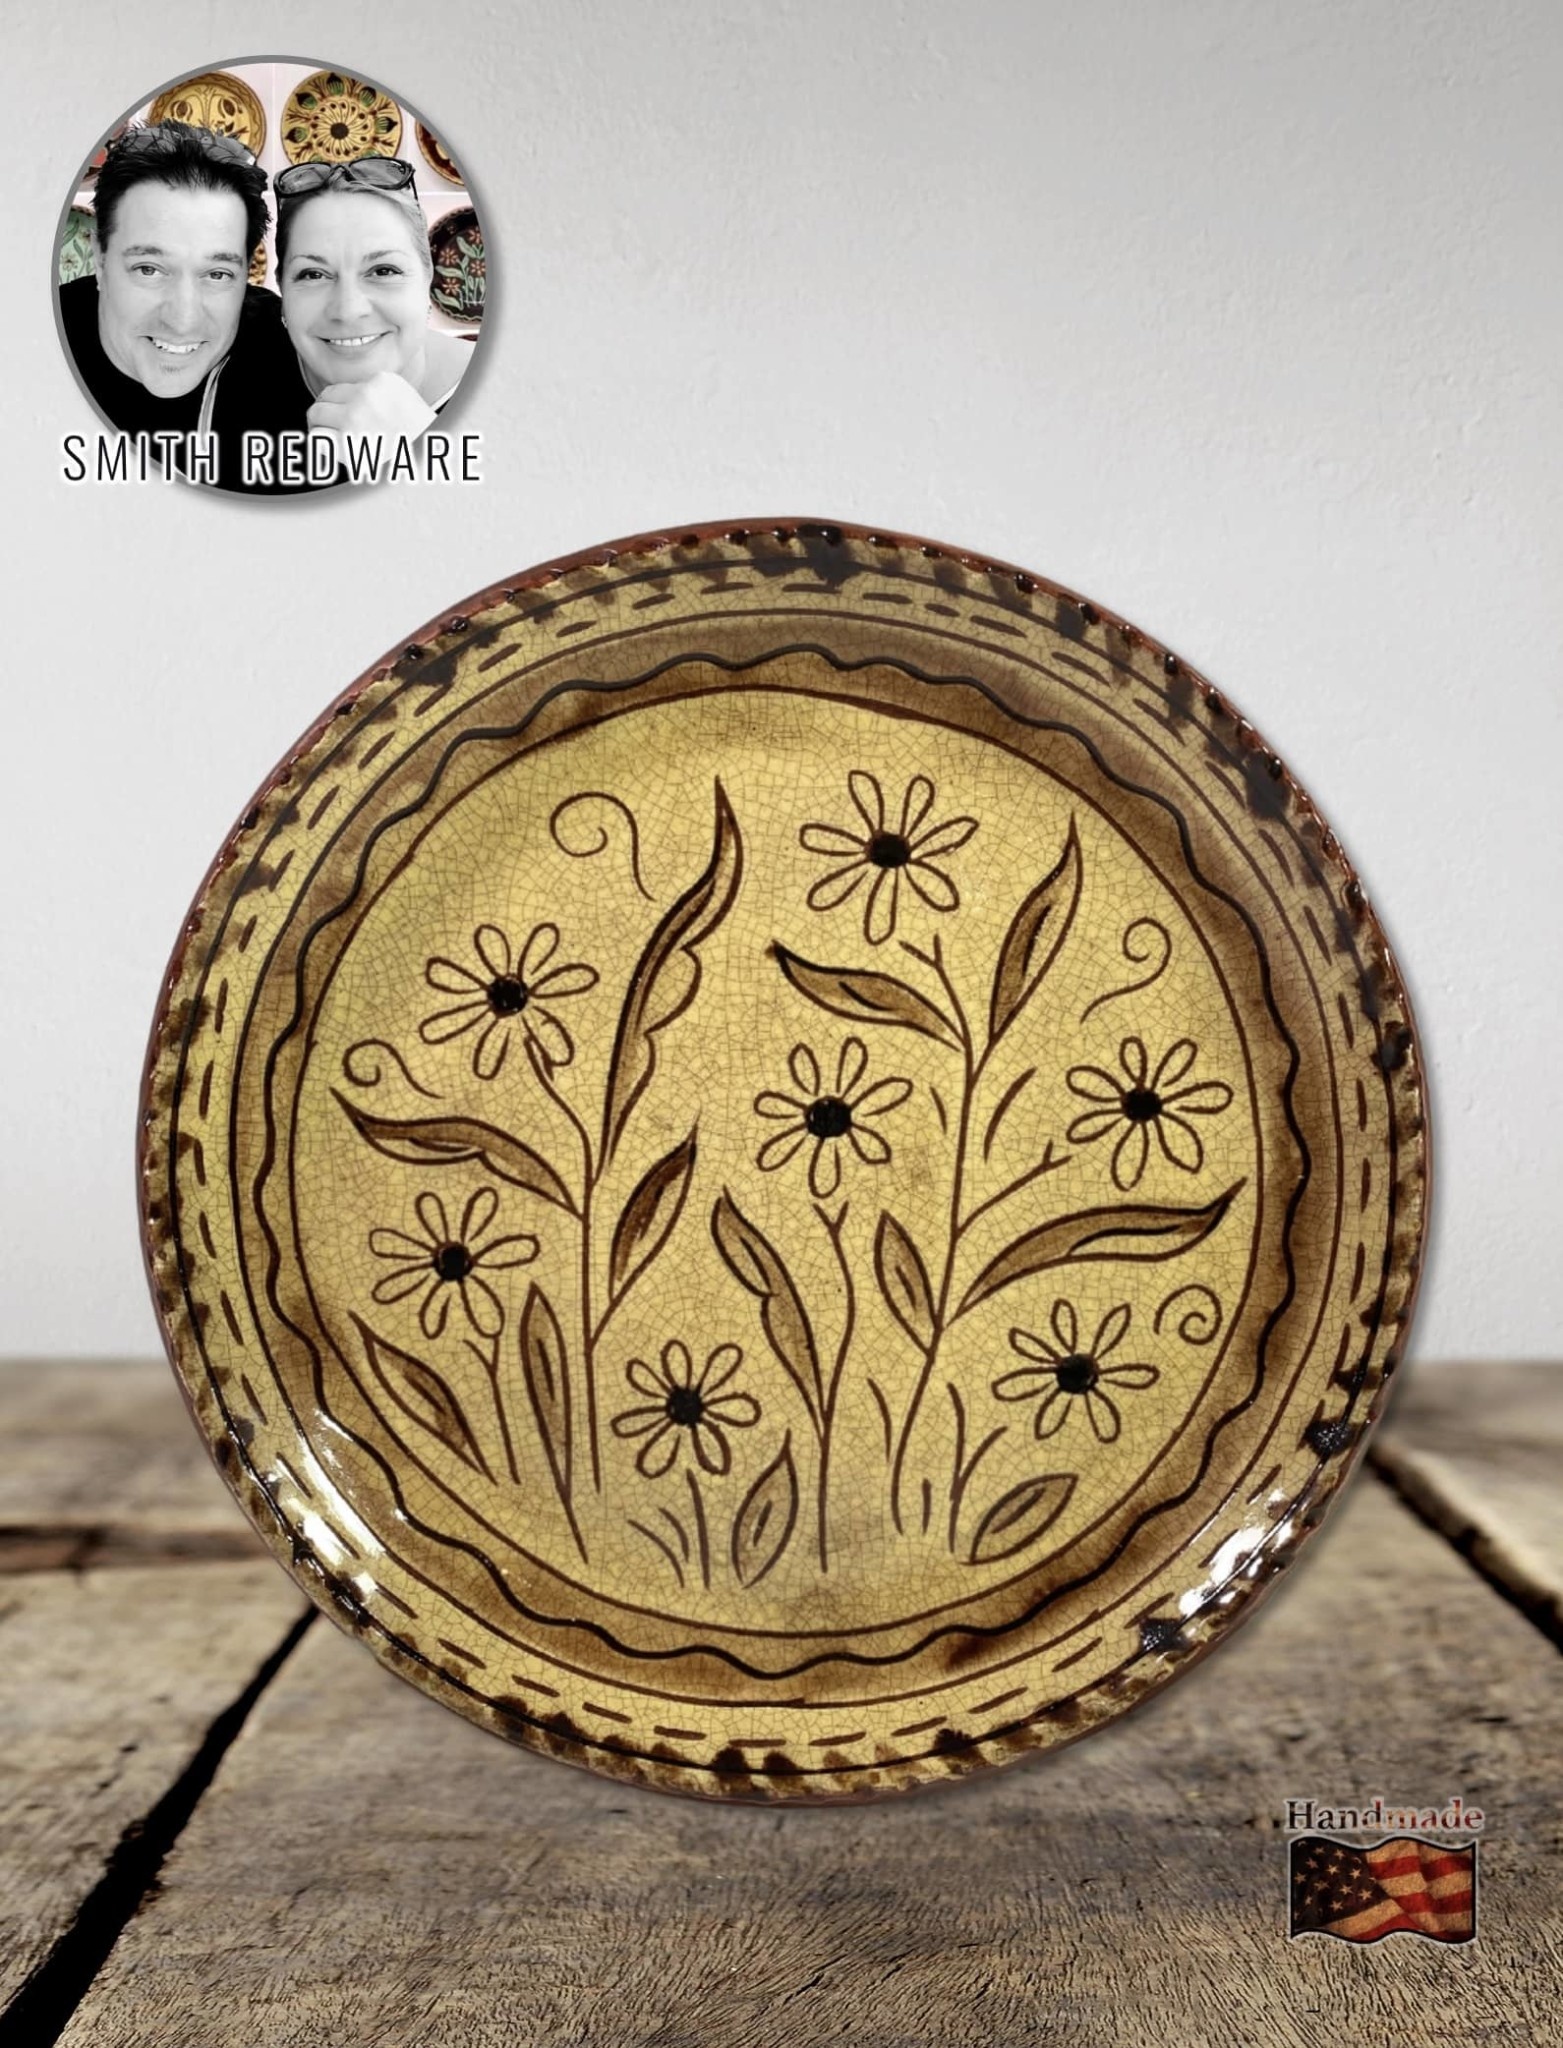 Smith Redware Field of Daisies Sgraffito Plate - 8" Brand: Smith Redware